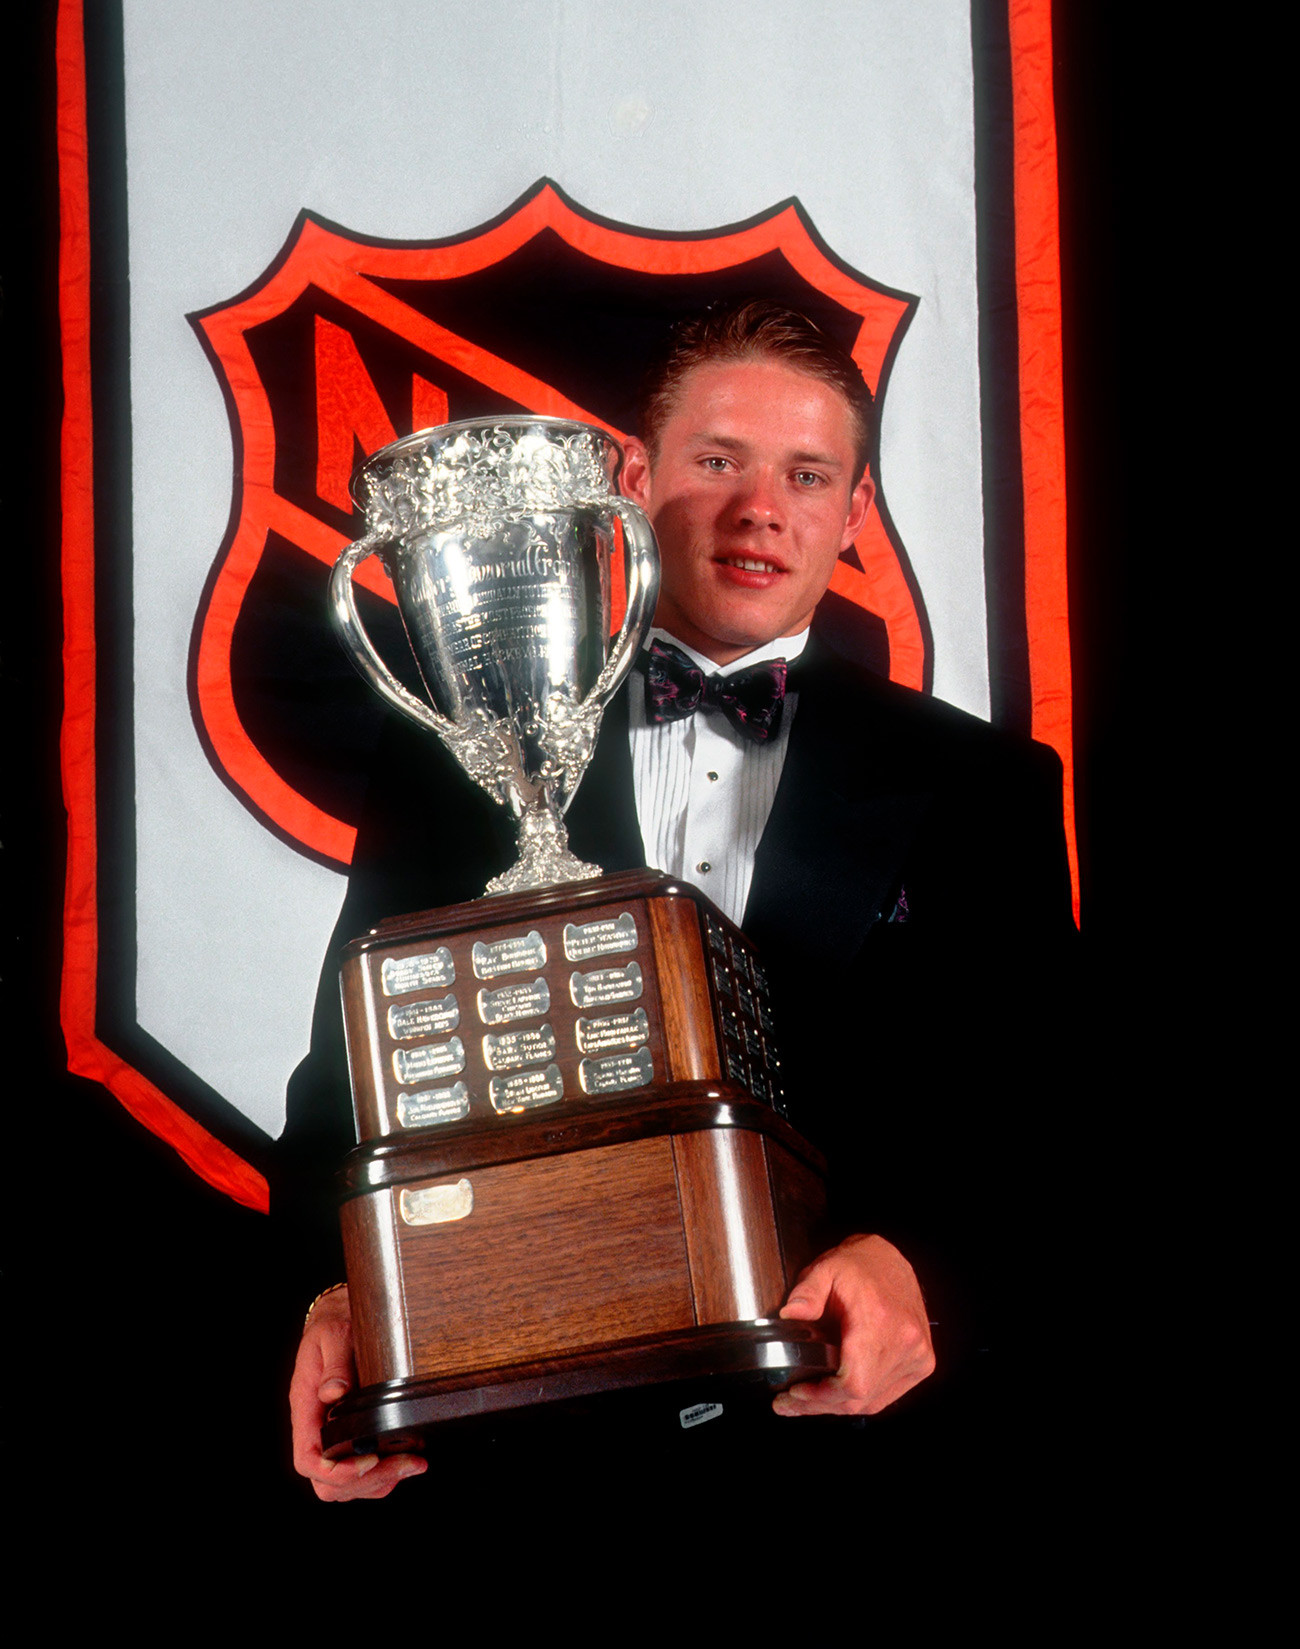 Pavel Bure of the Vancouver Canucks poses after winning the Calder Trophy named for the top rookie of the year.